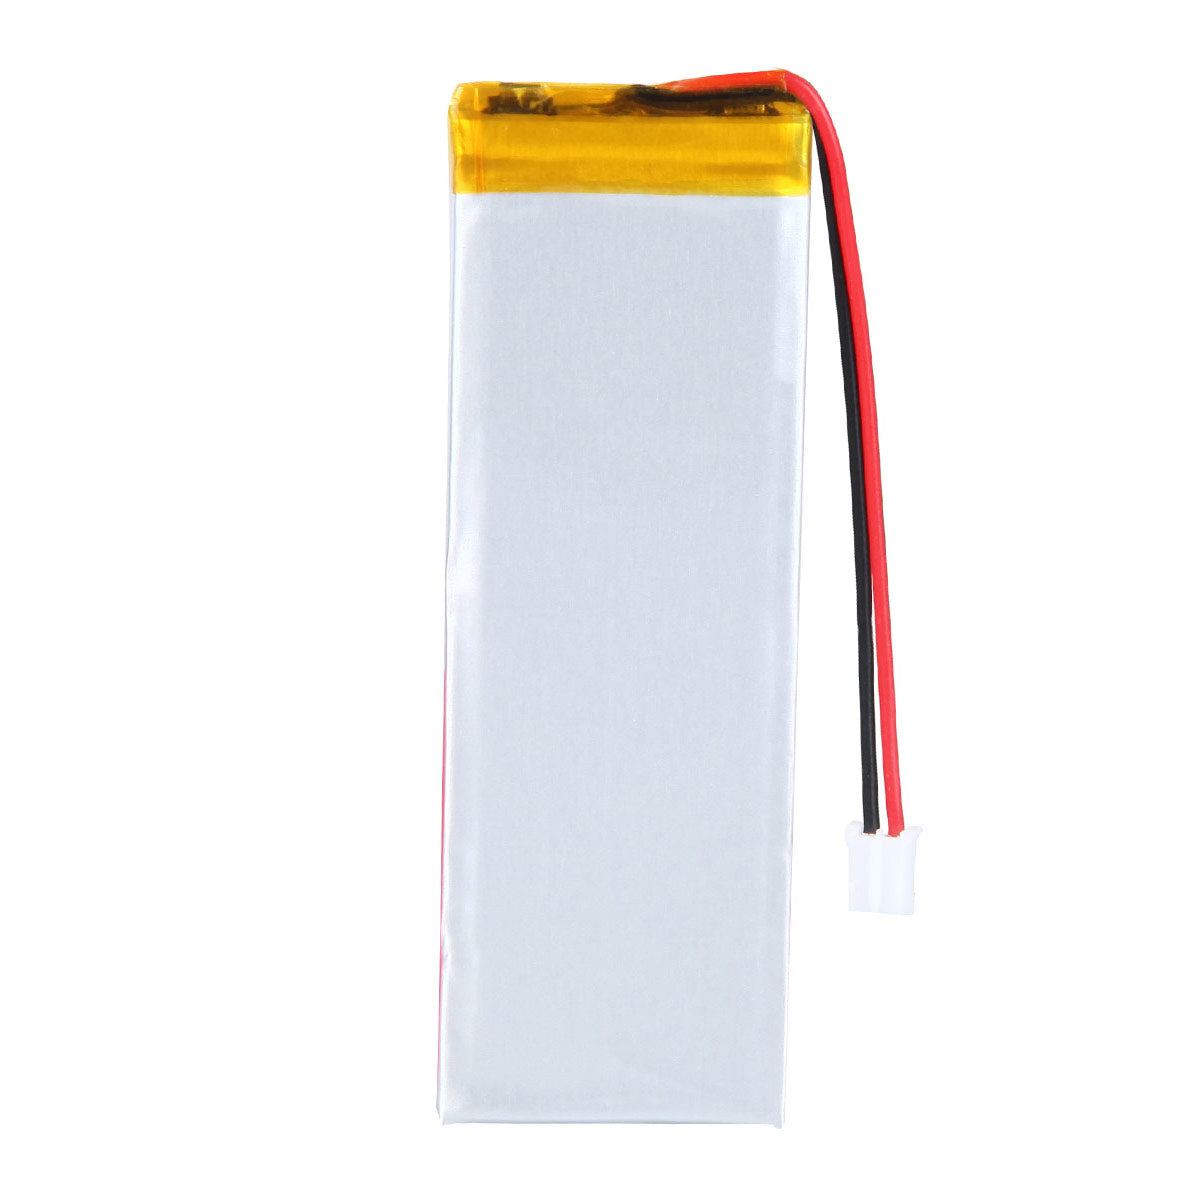 3.7V 382780 850mAh Rechargeable Lithium Polymer Battery